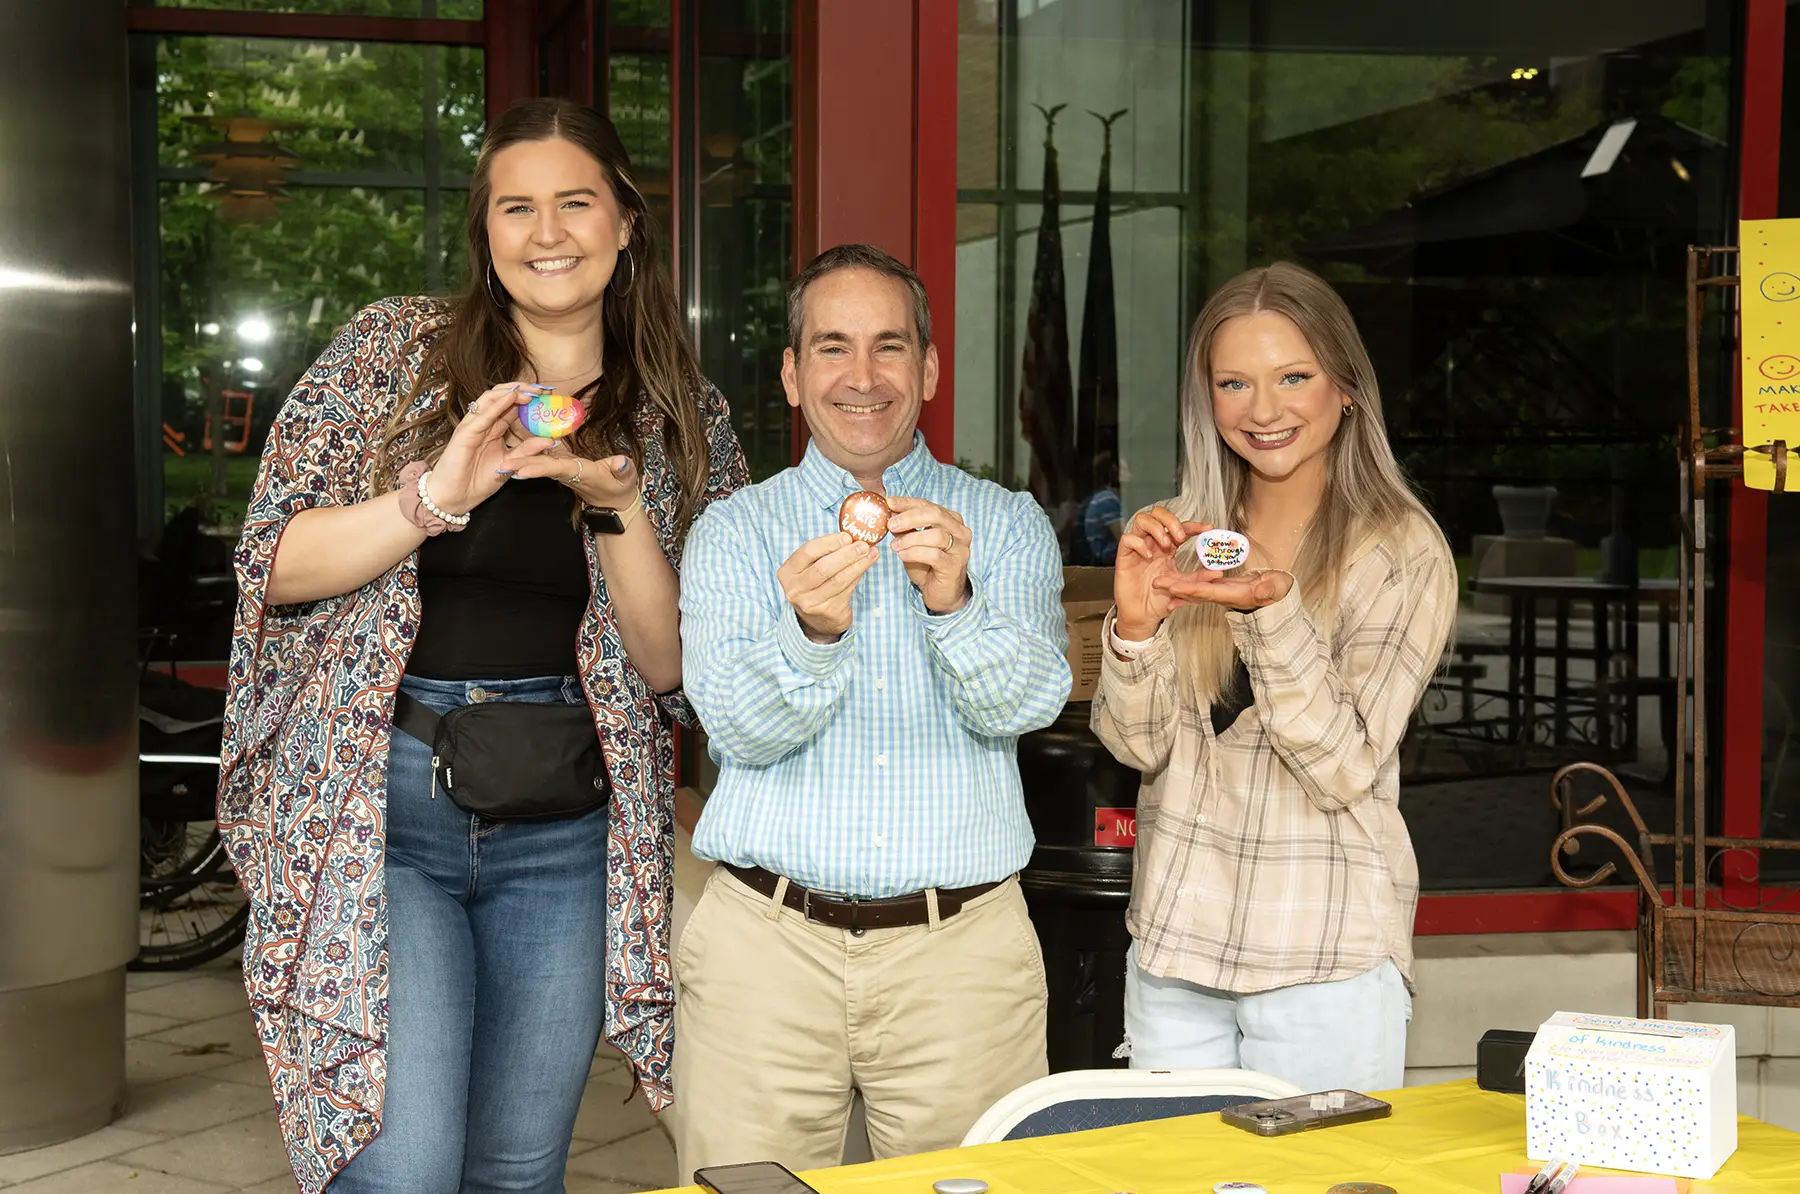 Dr. Scott Glassman is shown with two positive psychology students.